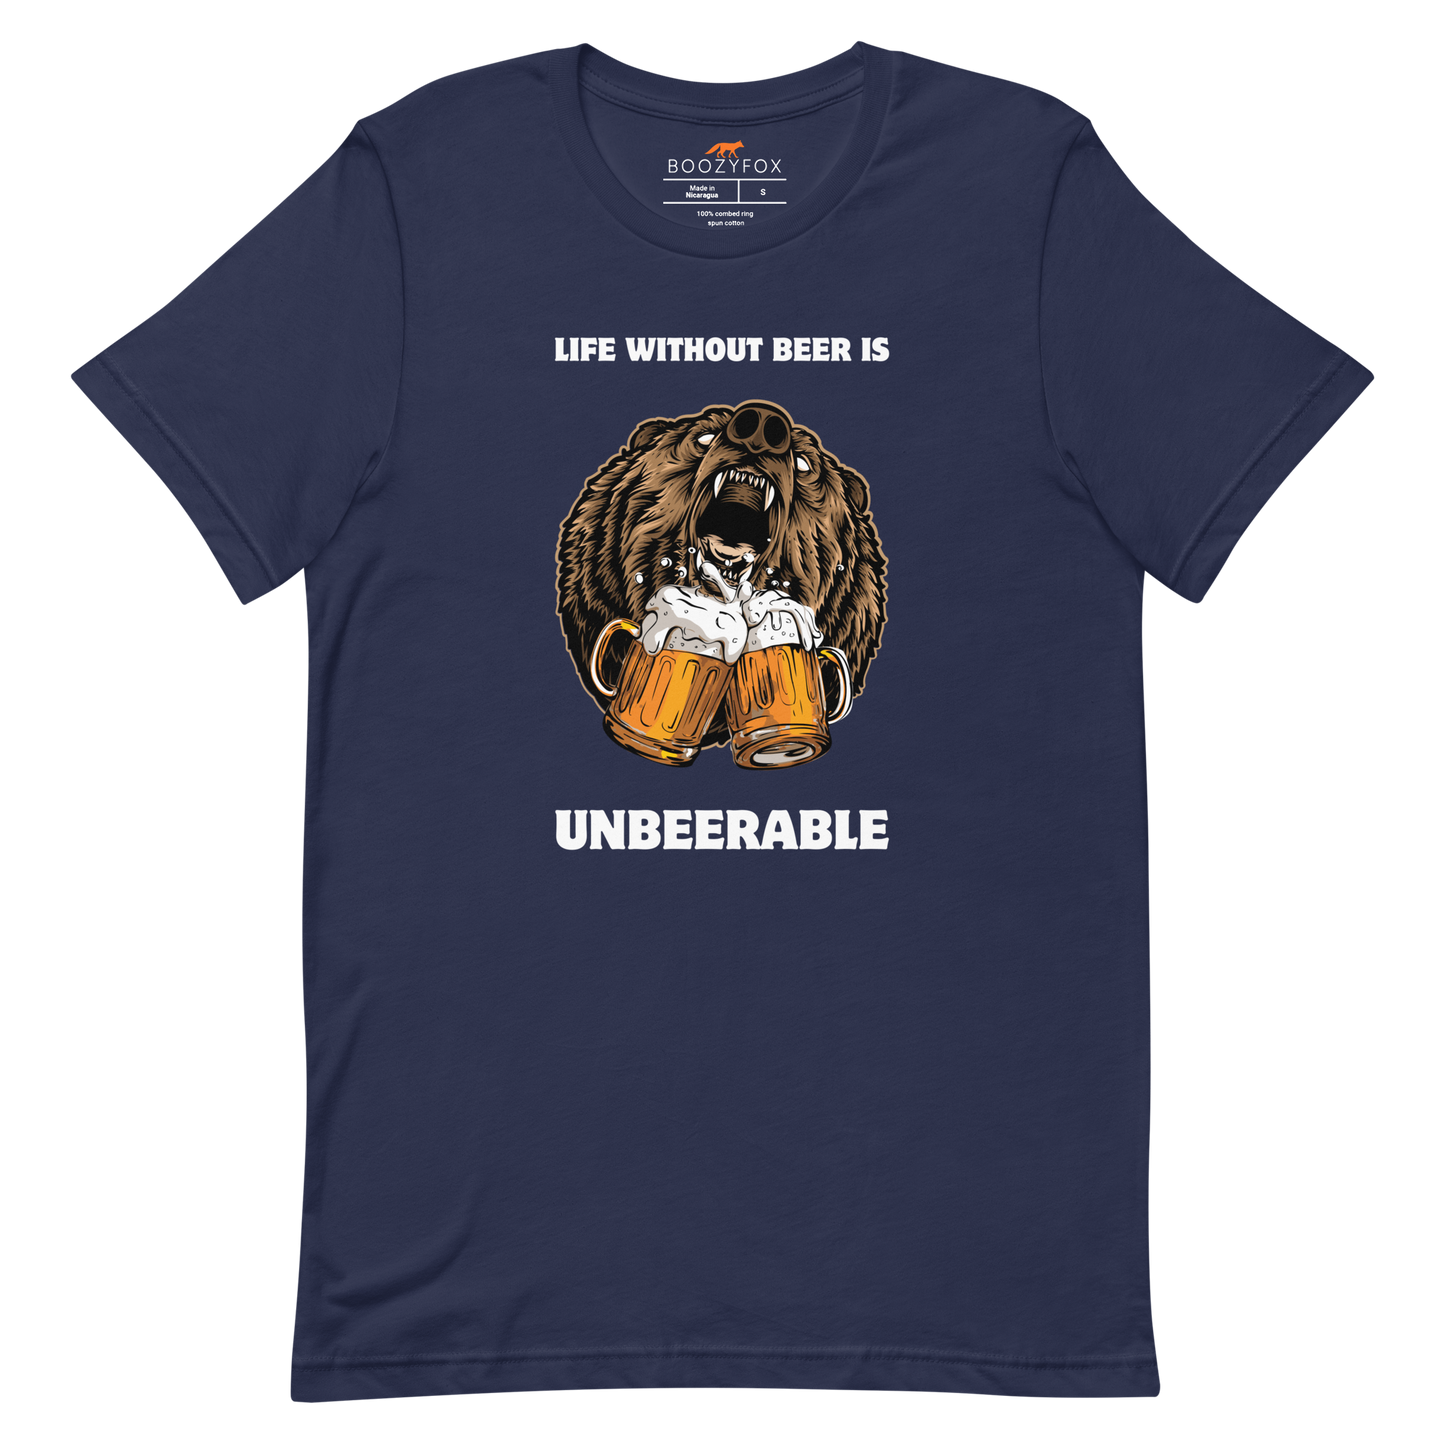 Navy Premium Bear Tee featuring a Life Without Beer Is Unbeerable graphic design on the chest - Funny Graphic Bear Tees - Boozy Fox